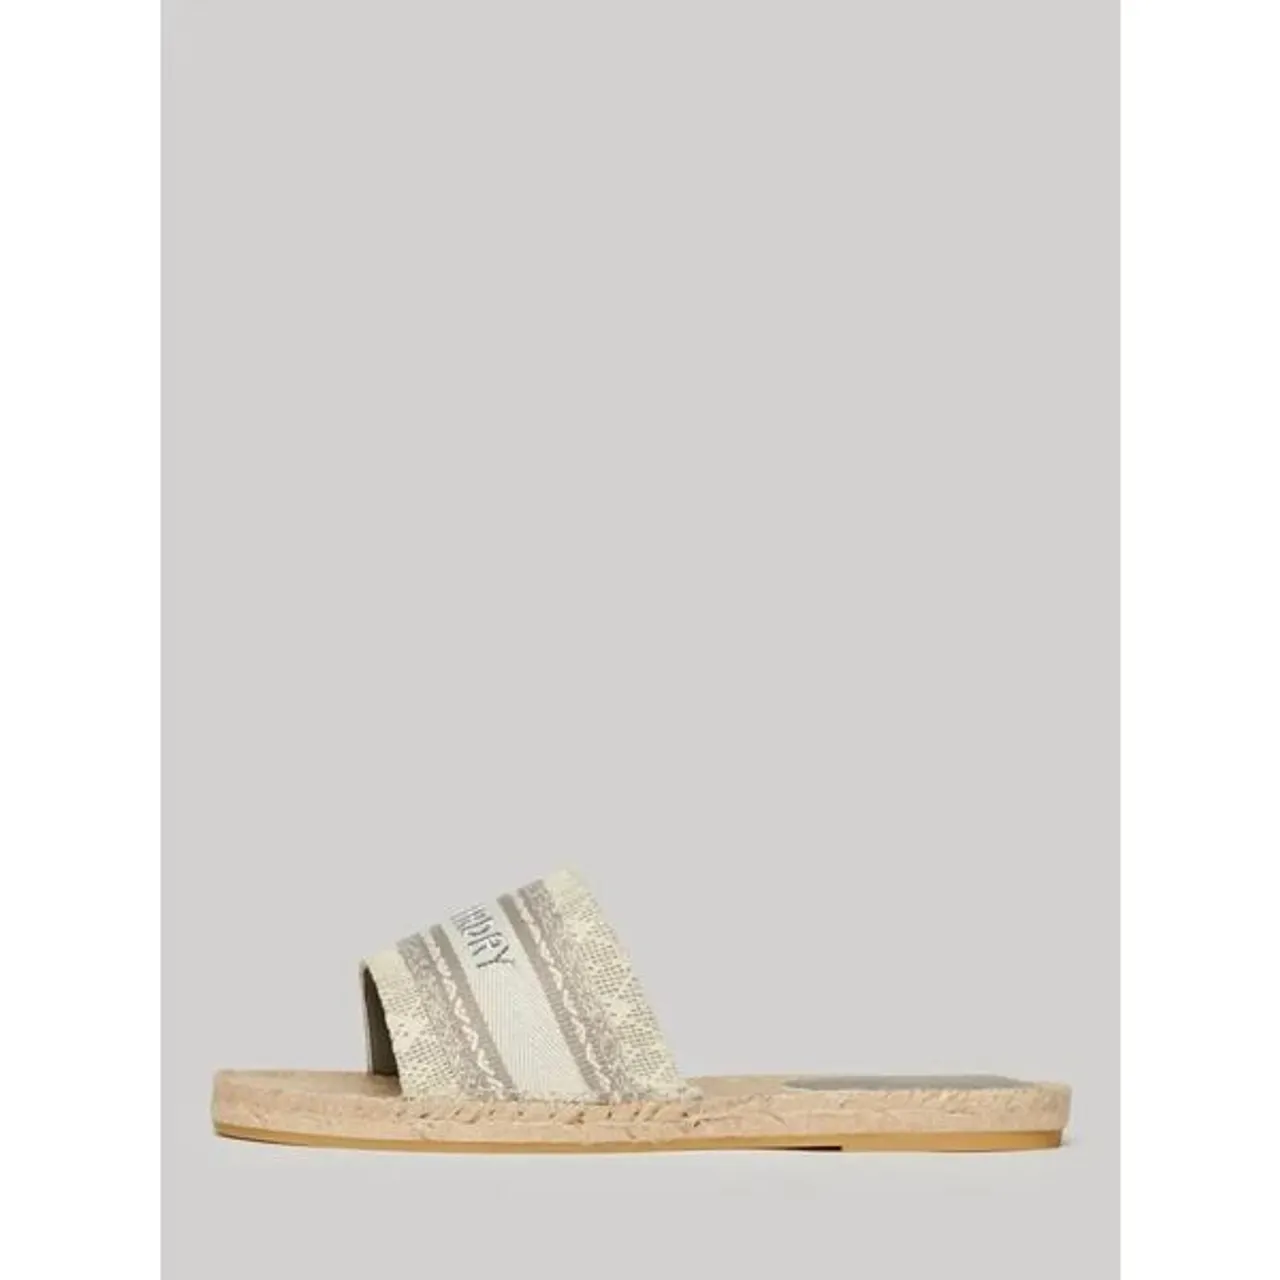 Superdry Lace Overlay Canvas Espadrille Sliders - Moon Rock Grey - Female